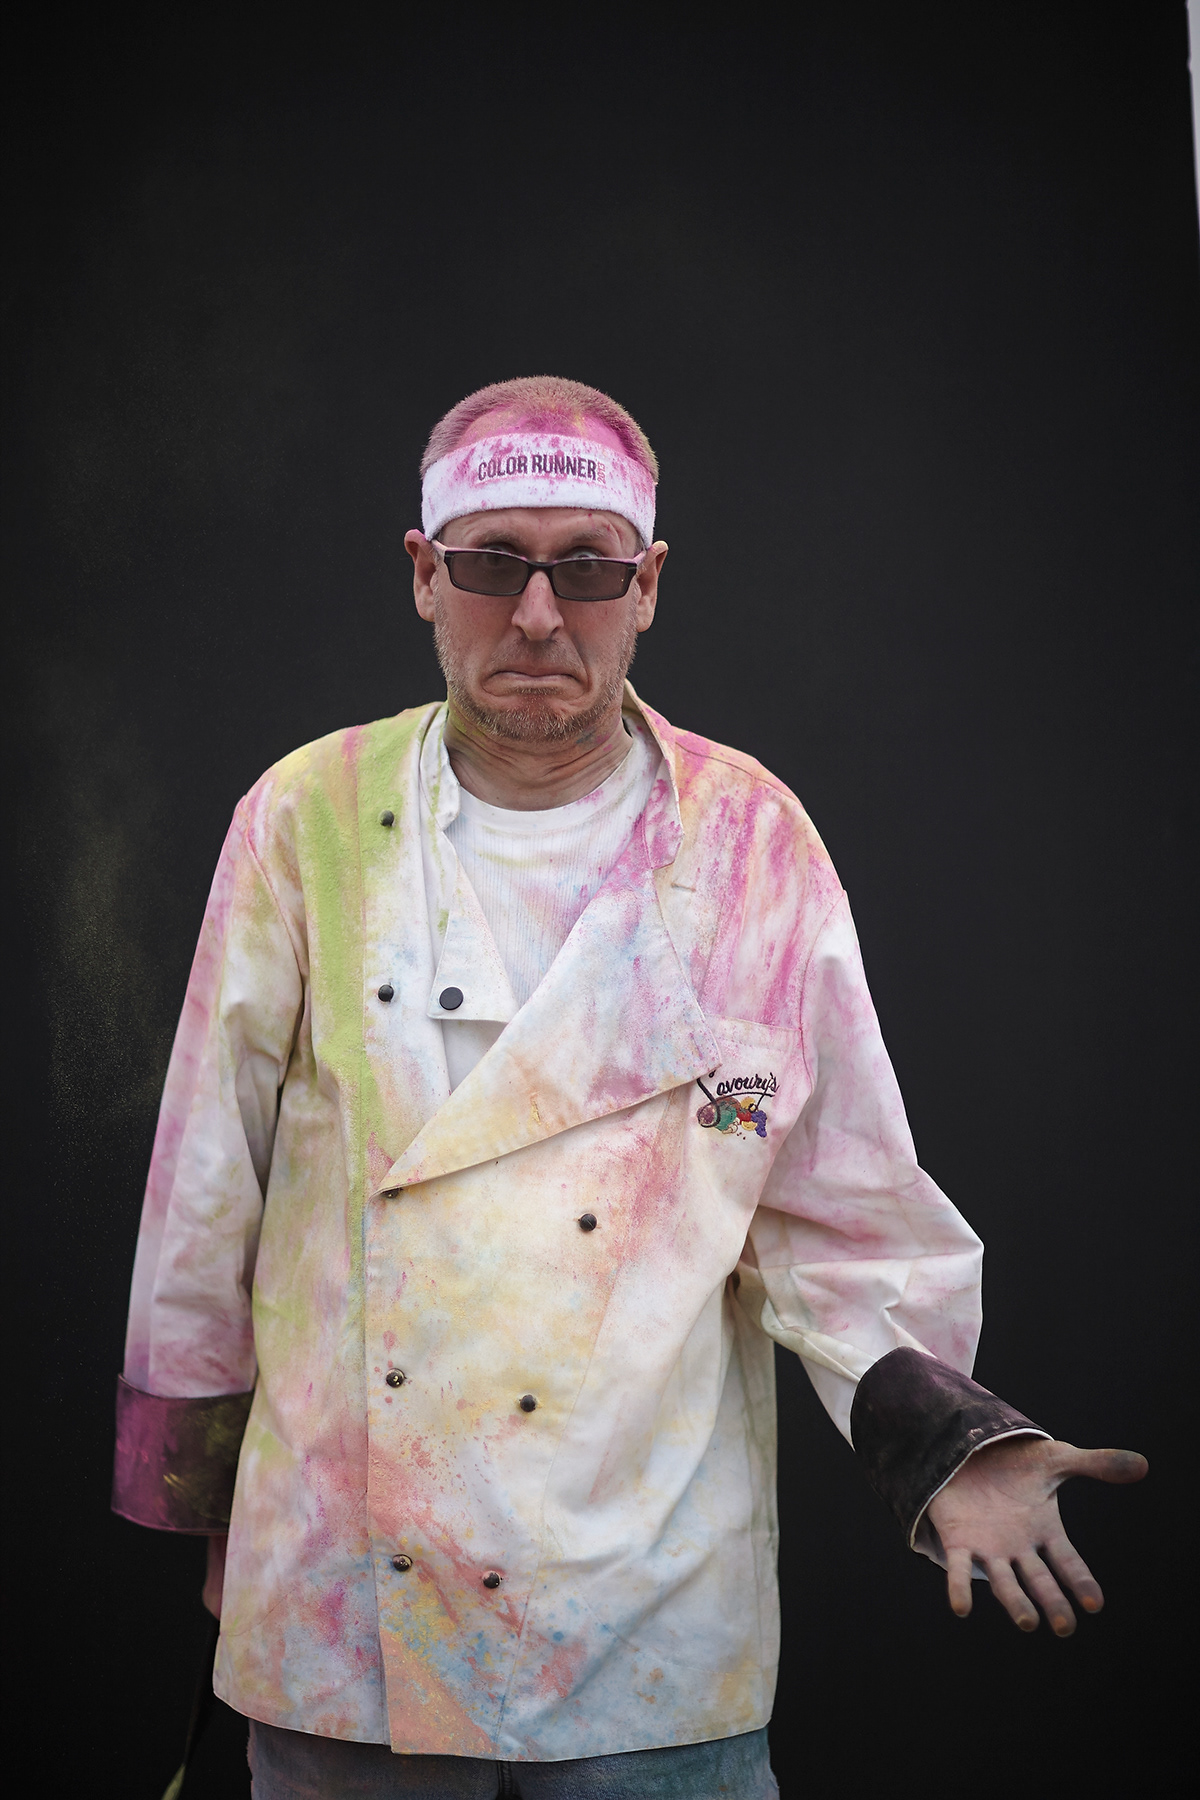 the color run Los Angeles portraits Natural Light lifestyle youth